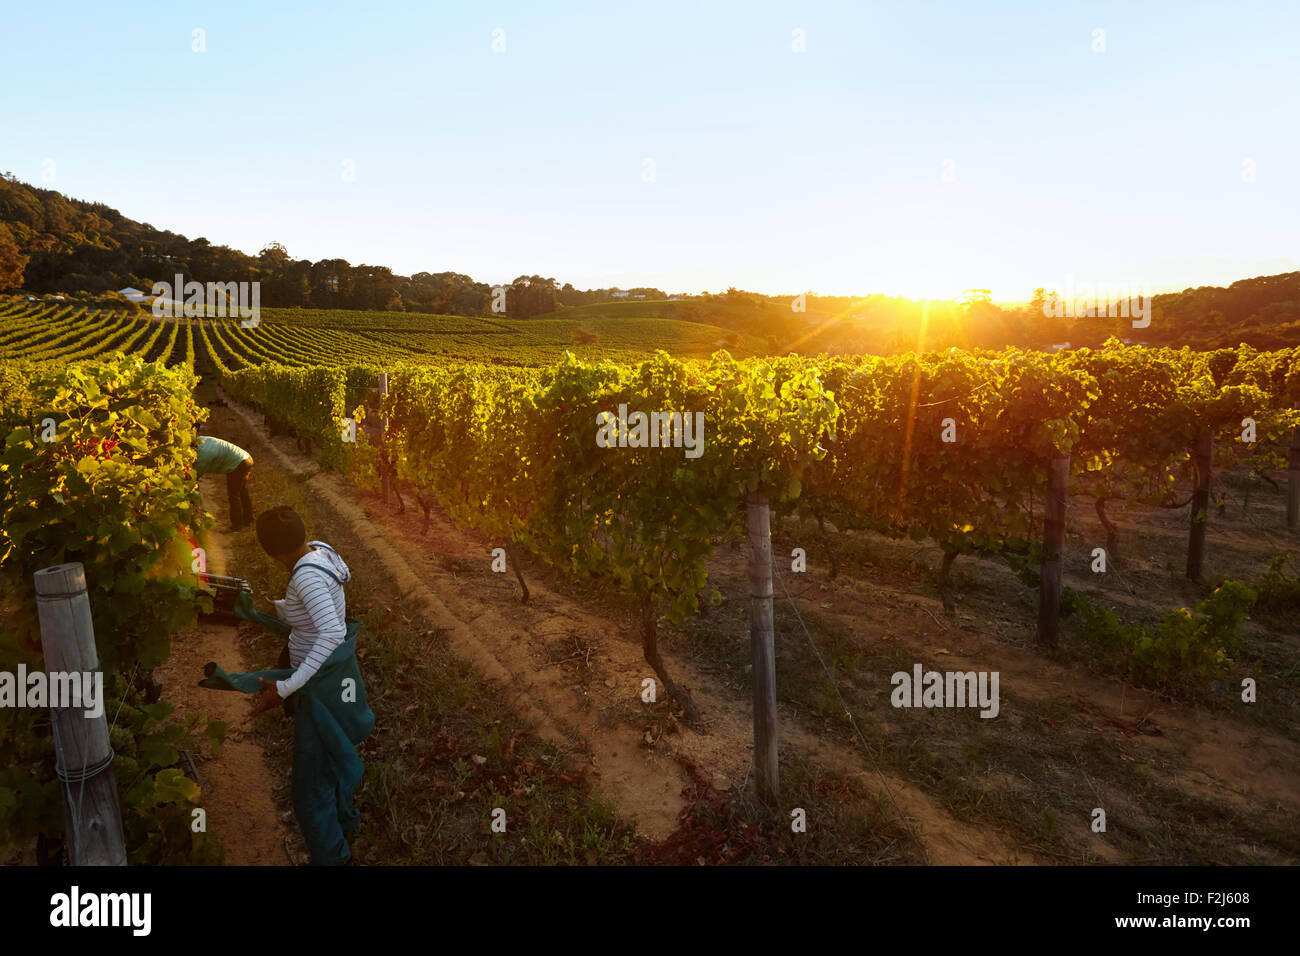 Row of vines with workers working in grape farm. People harvesting grapes in vineyard. Stock Photo